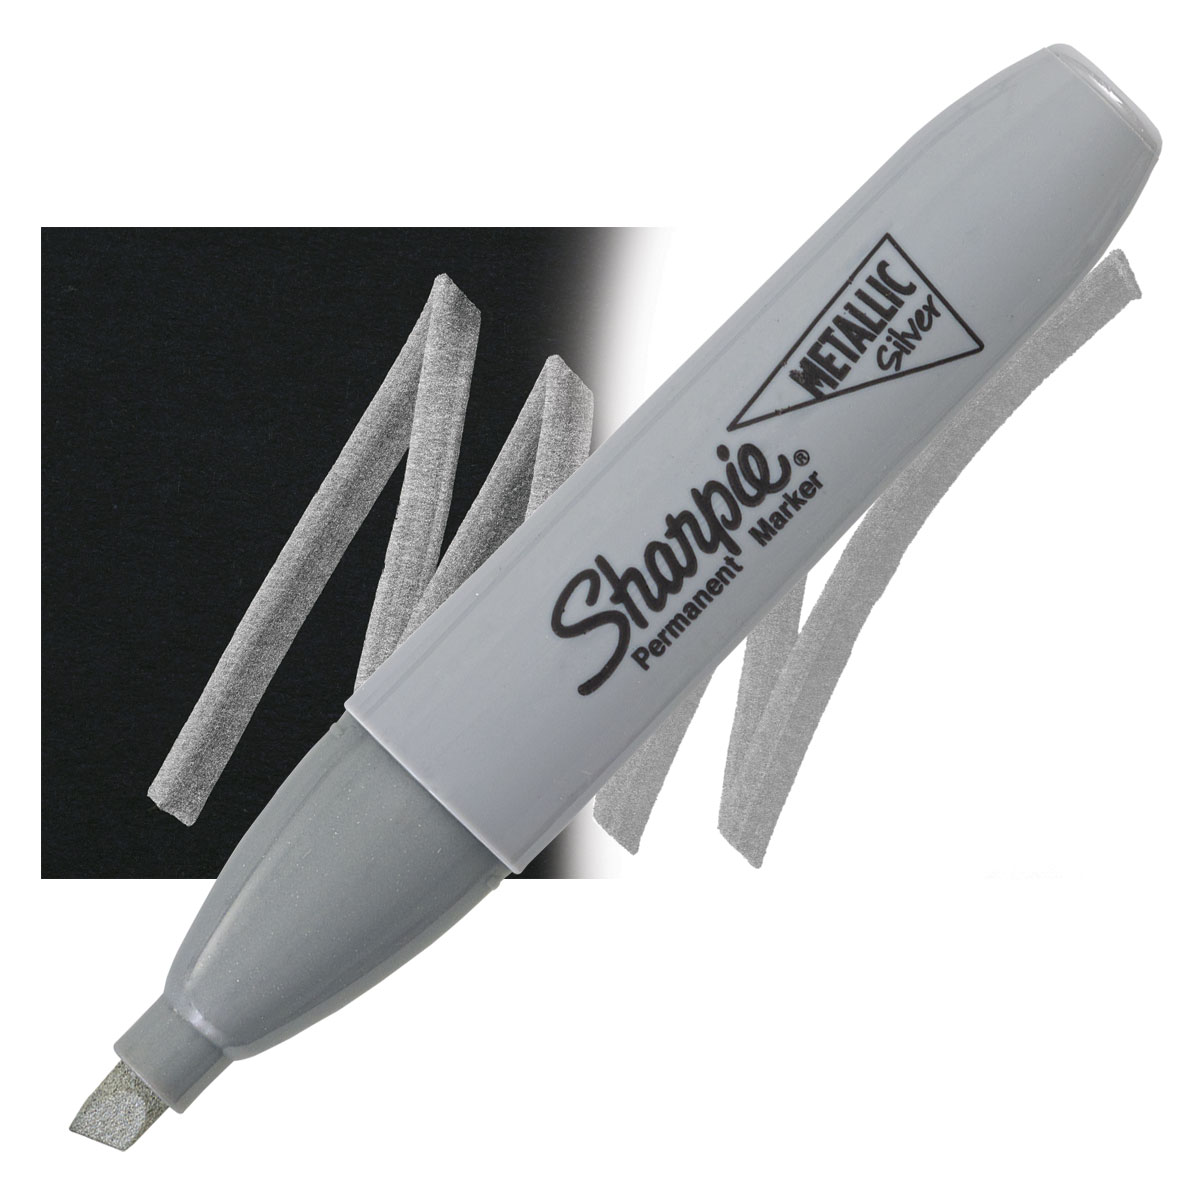 Silver sharpie to fill in scratches/chips?